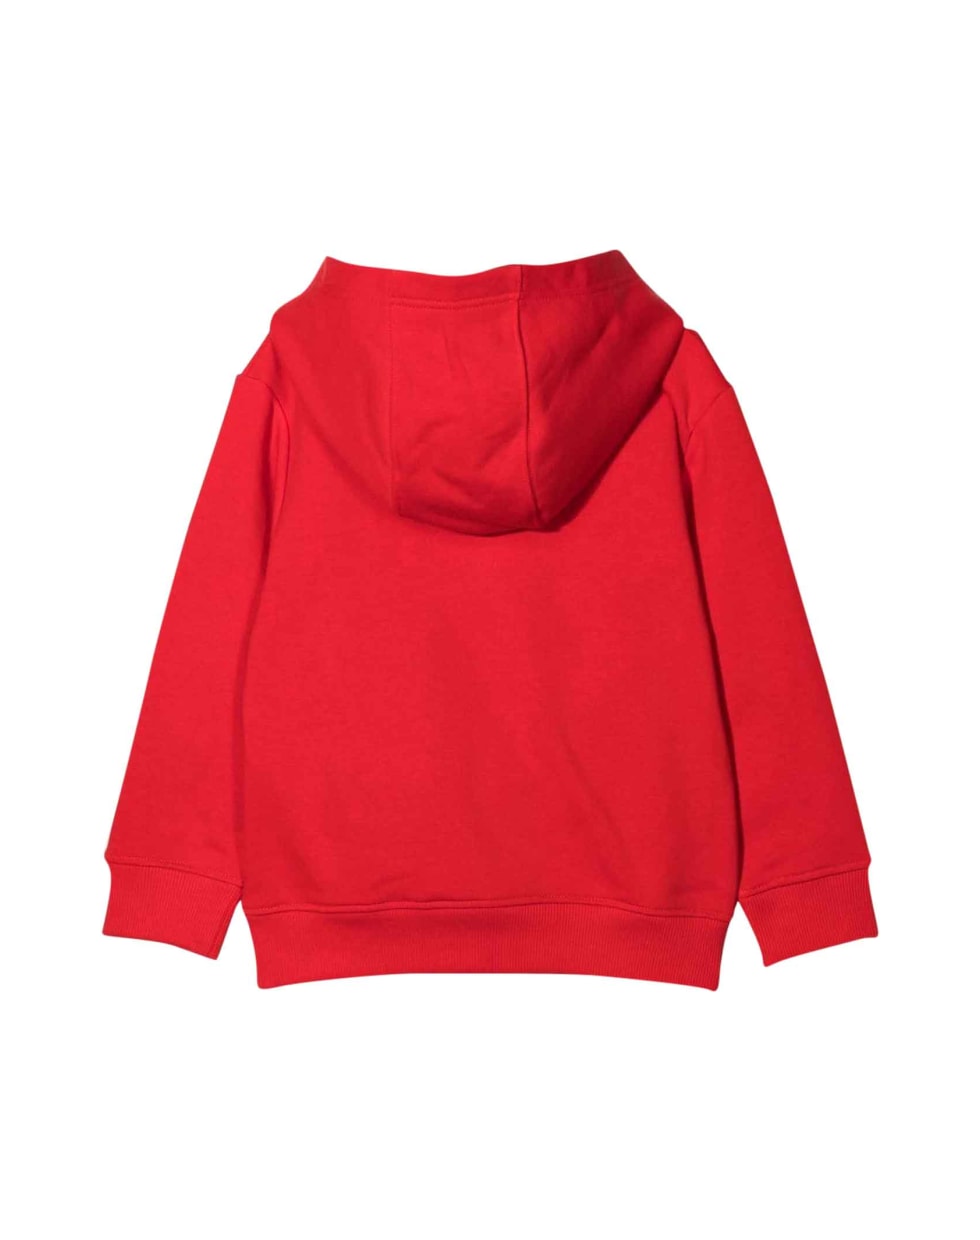 Givenchy Unisex Red Sweatshirt - Rosso